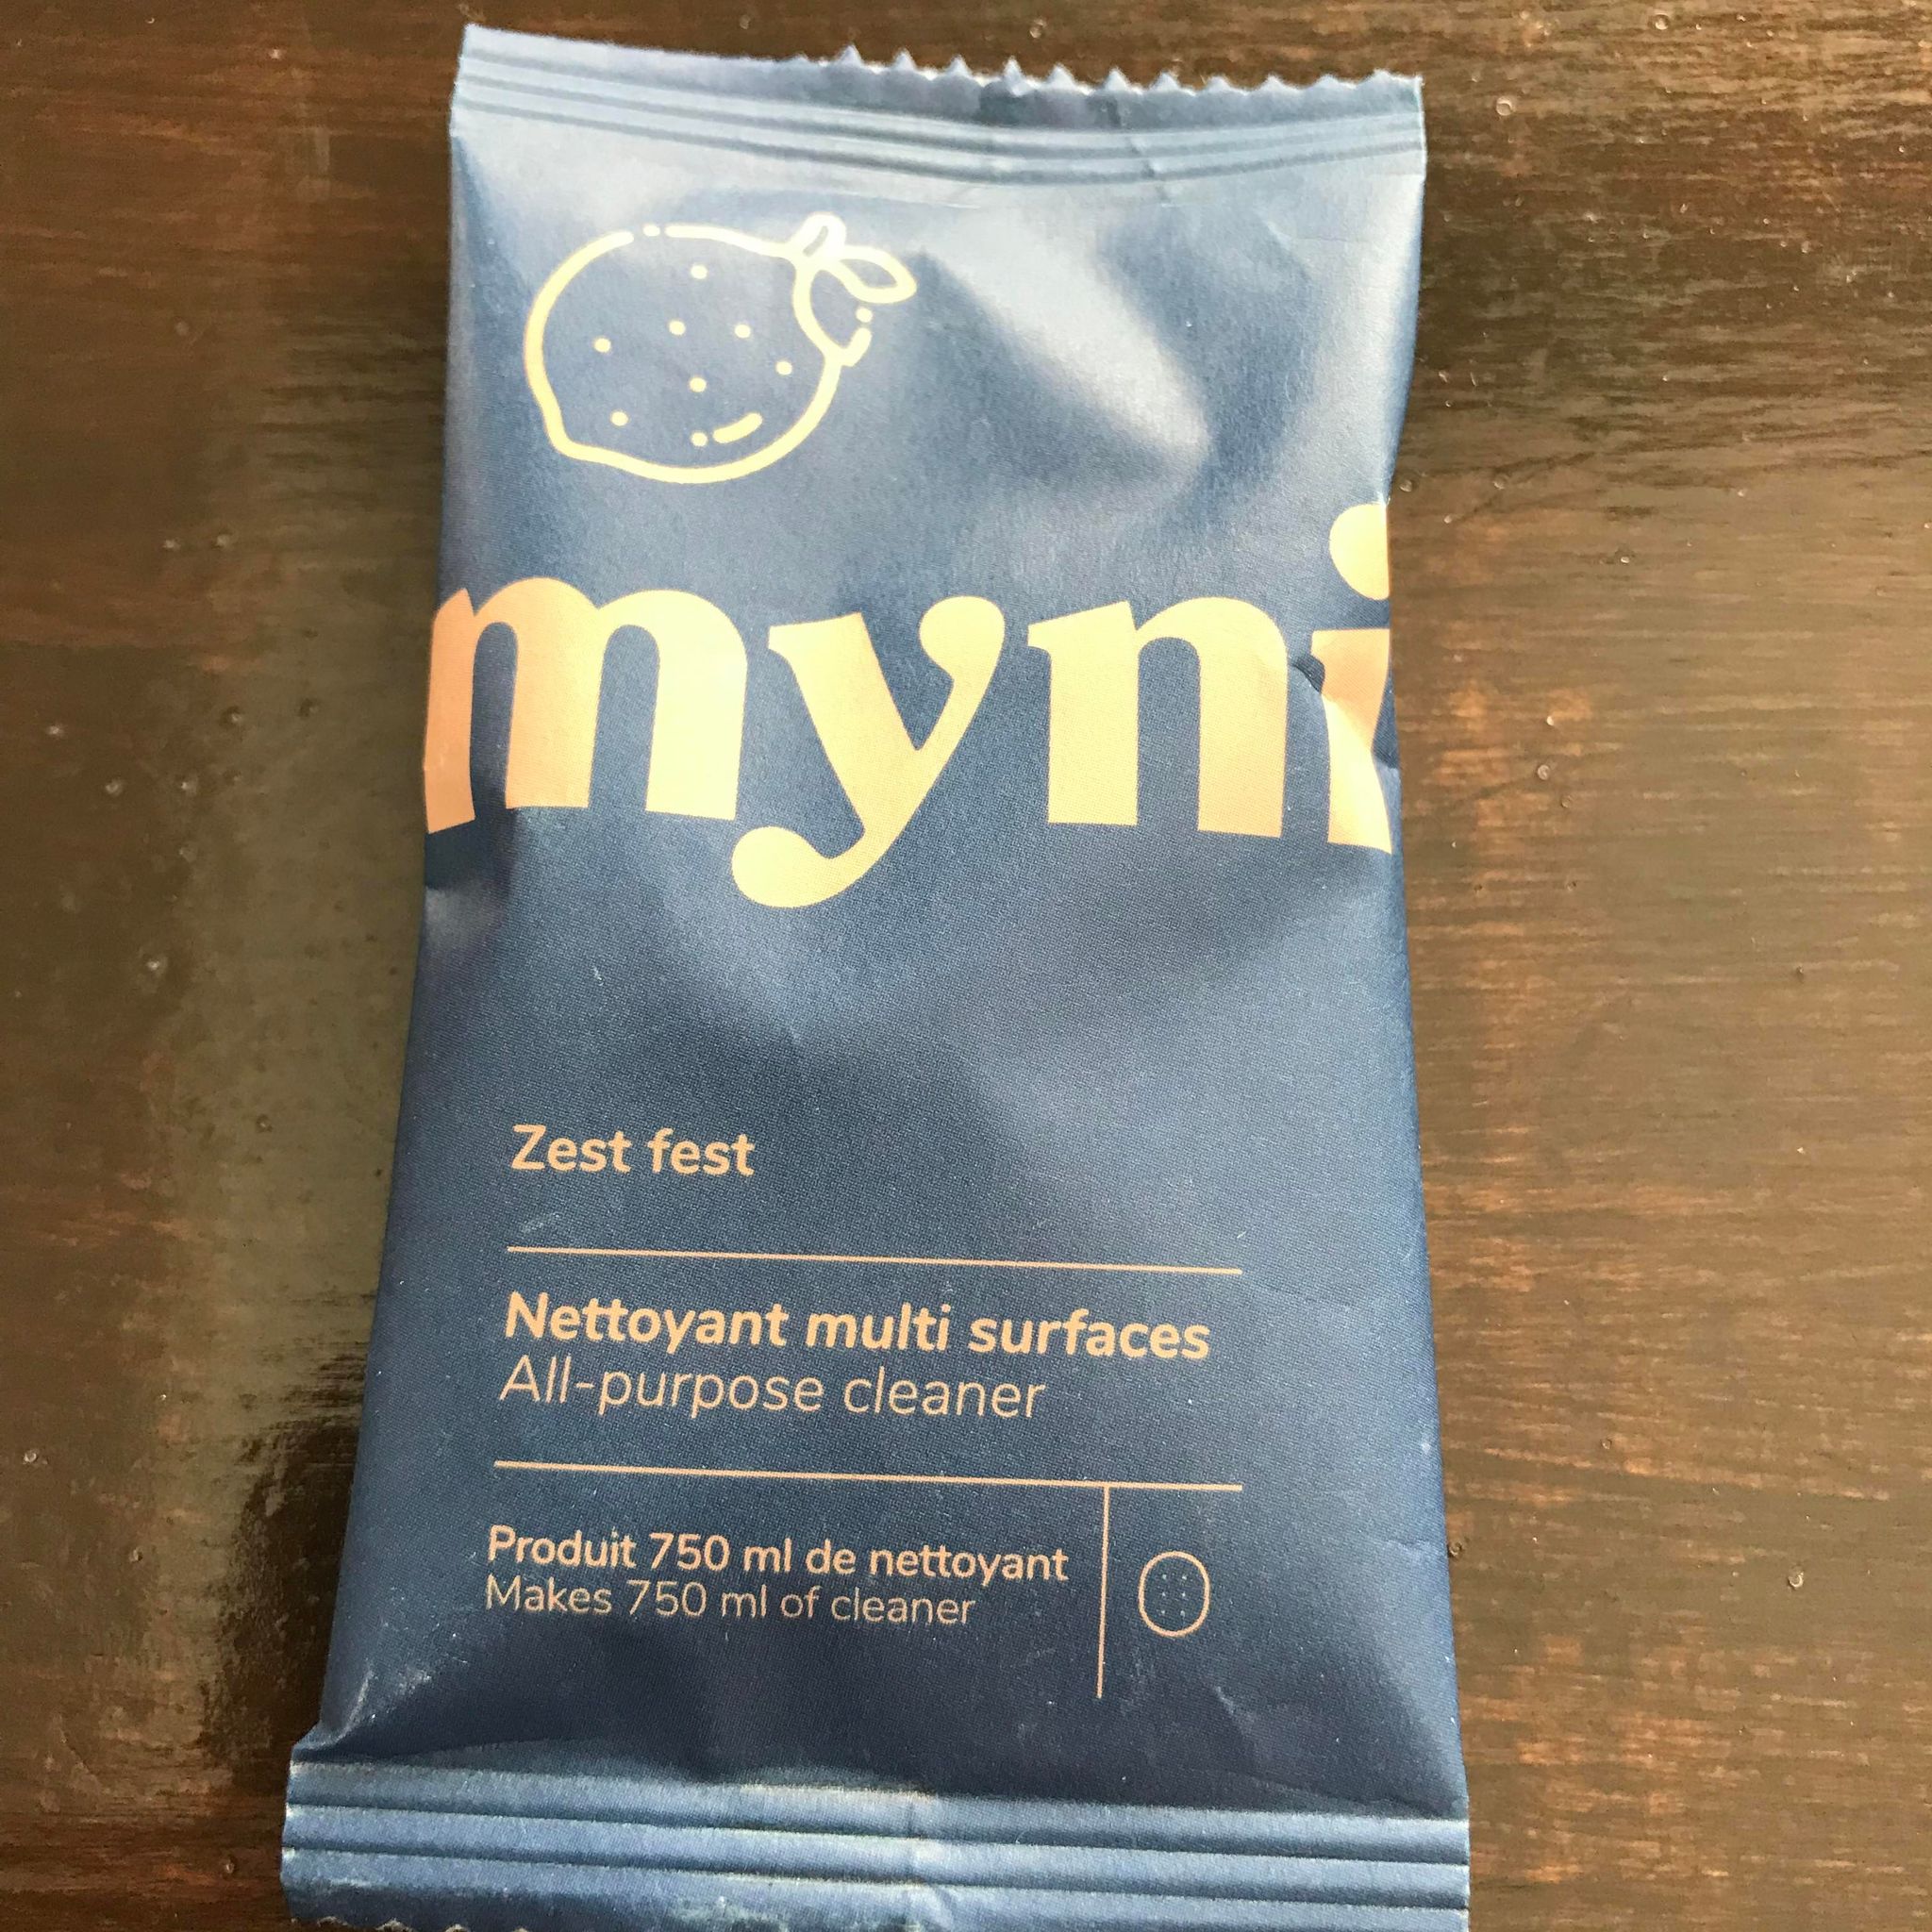 Zest fest lemon and mint scented all purpose cleaning tablet made in canada by myni